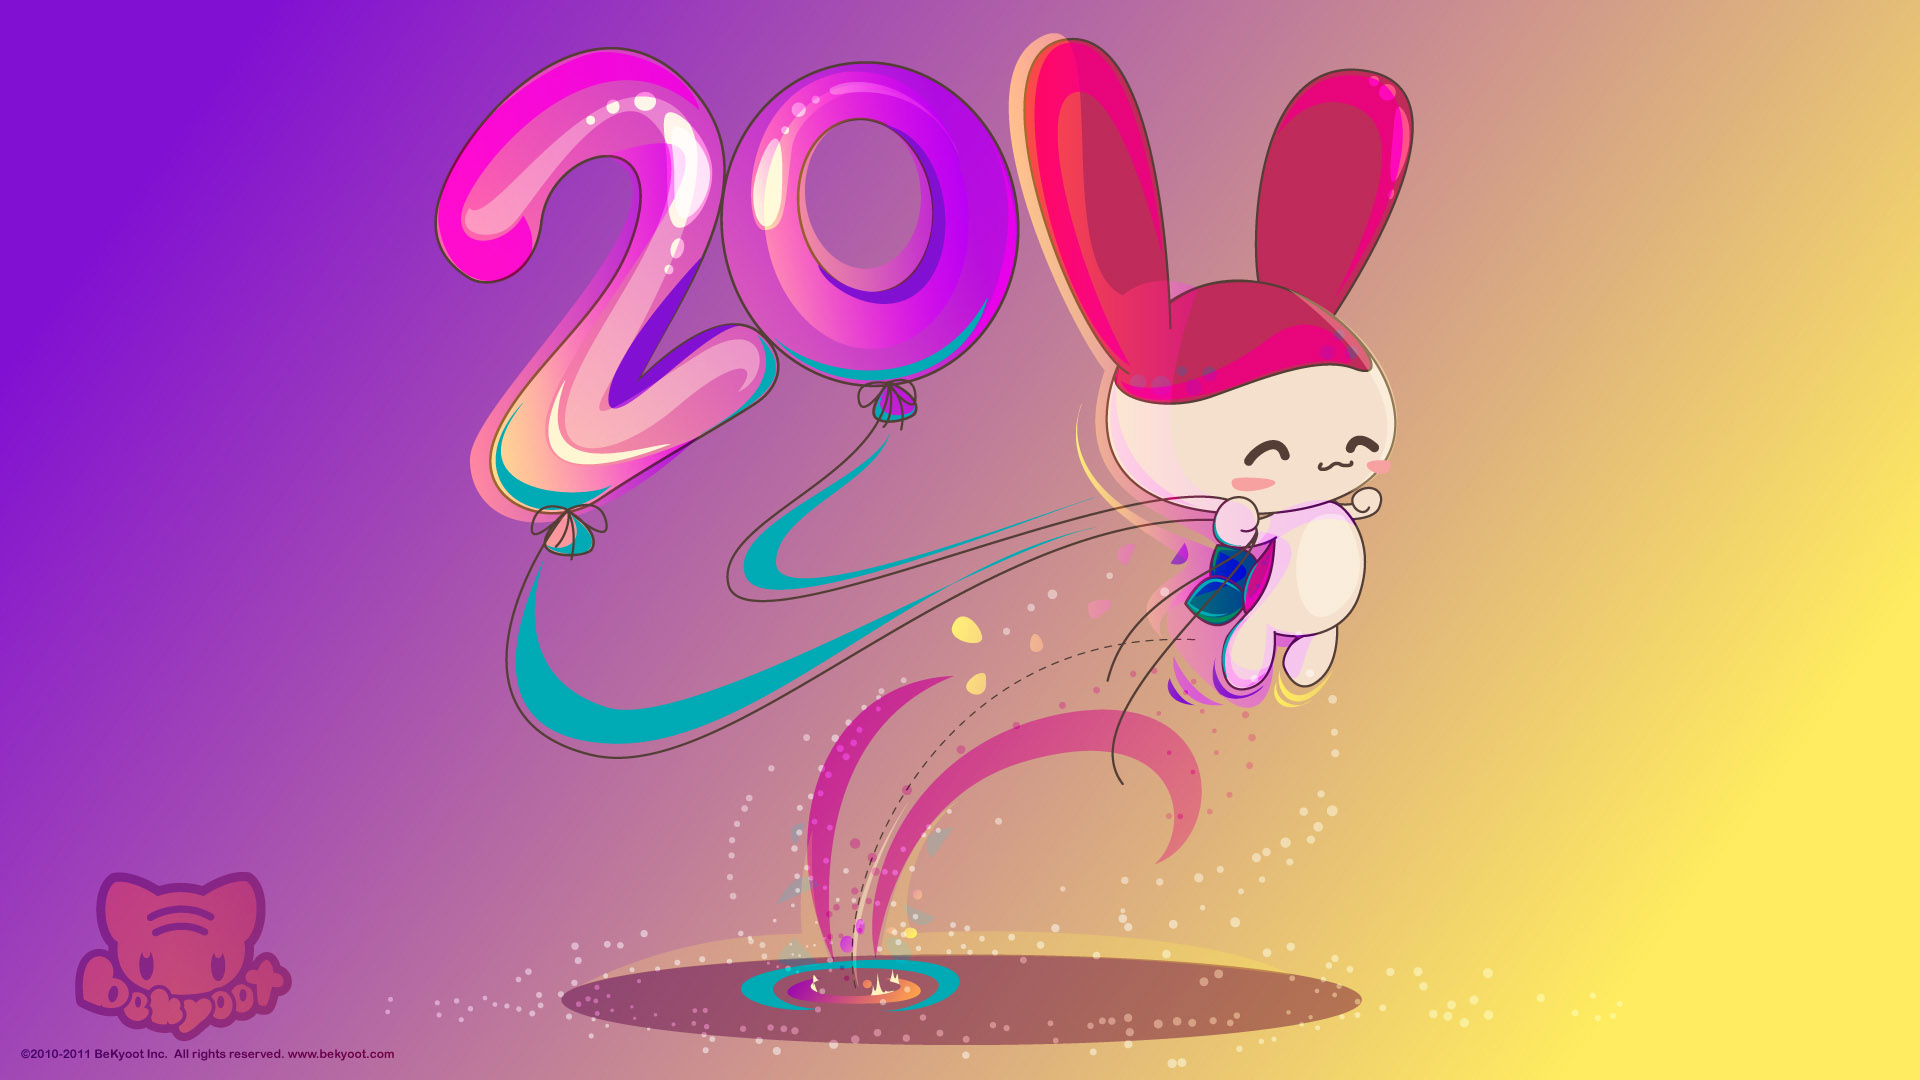 Exquisite Creative Wallpaper for the Year of the Rabbit 2011